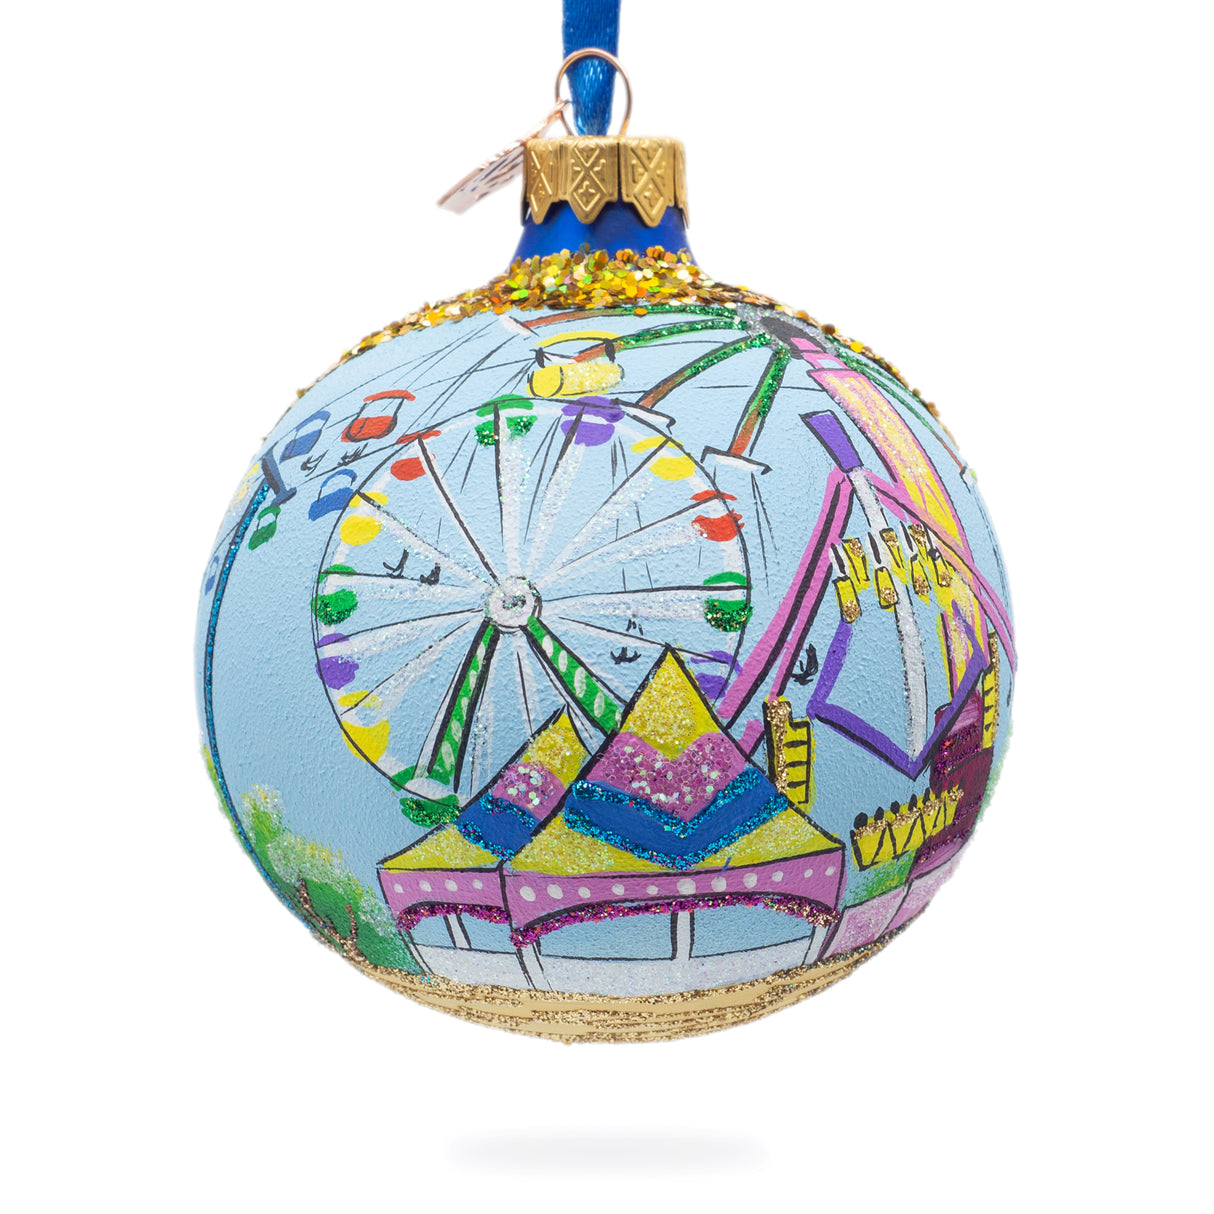 State Fair, St Paul, Minnesota, USA Glass Ball Christmas Ornament 3.25 Inches in Multi color, Round shape